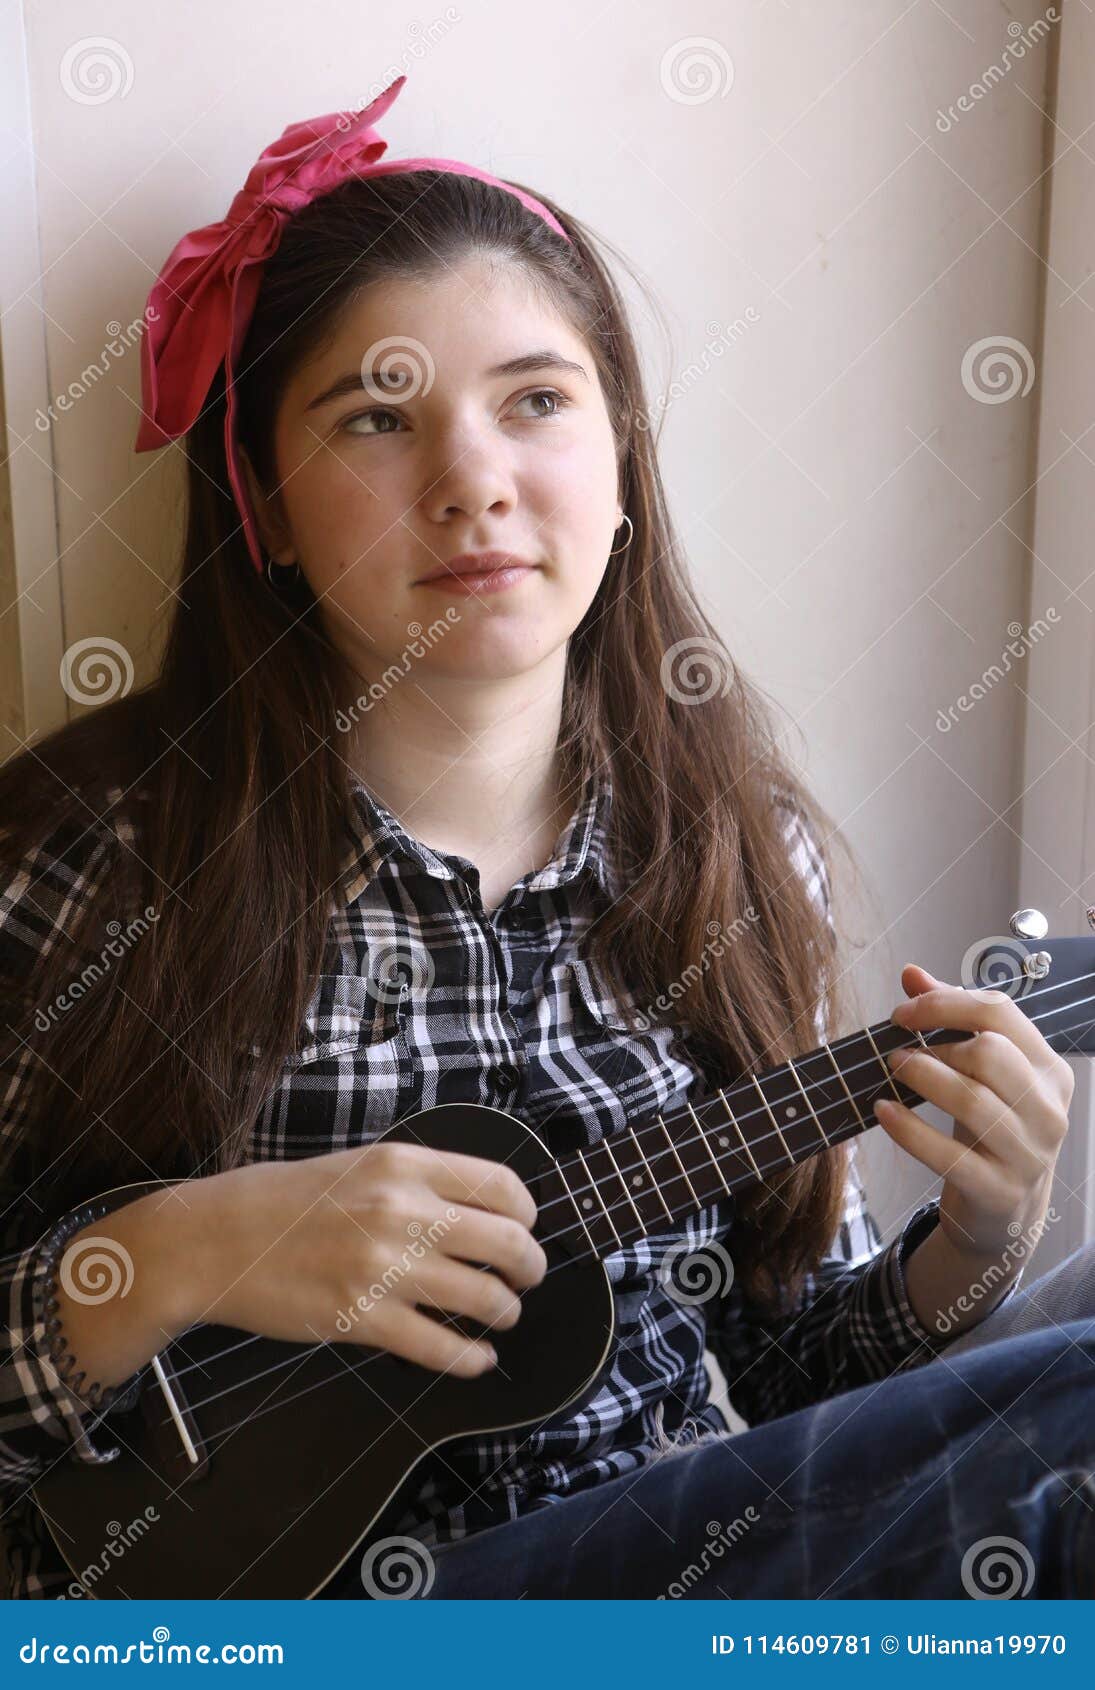 Smiling barefoot teen girl wearing lasses black leggings, grey shirt  playing song on yellow ukulele guitar while sitting on wooden stairs at  home indoors, looking at camera. Music and hobbies concept Stock